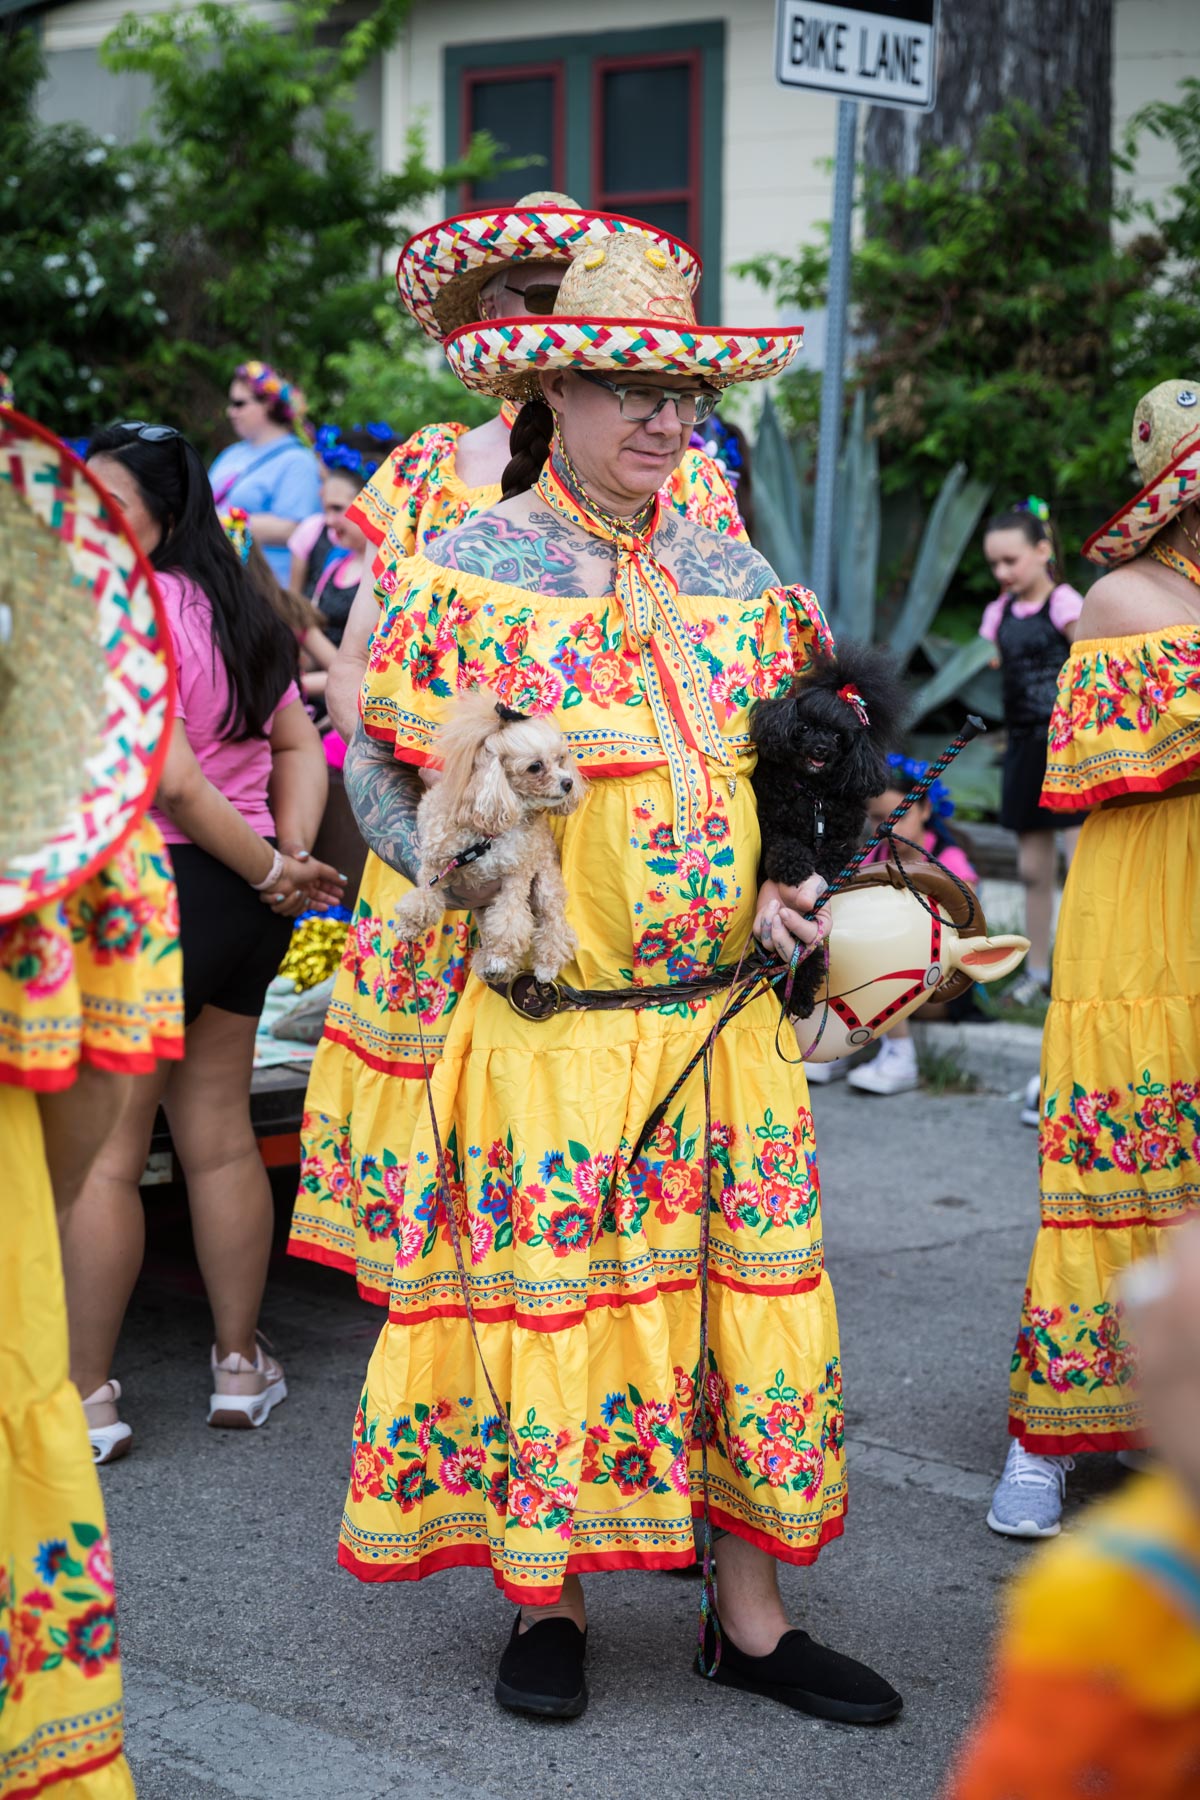 Man wearing yellow dress, sombrero and holding chihuahua for an article on the Fiesta photo tips